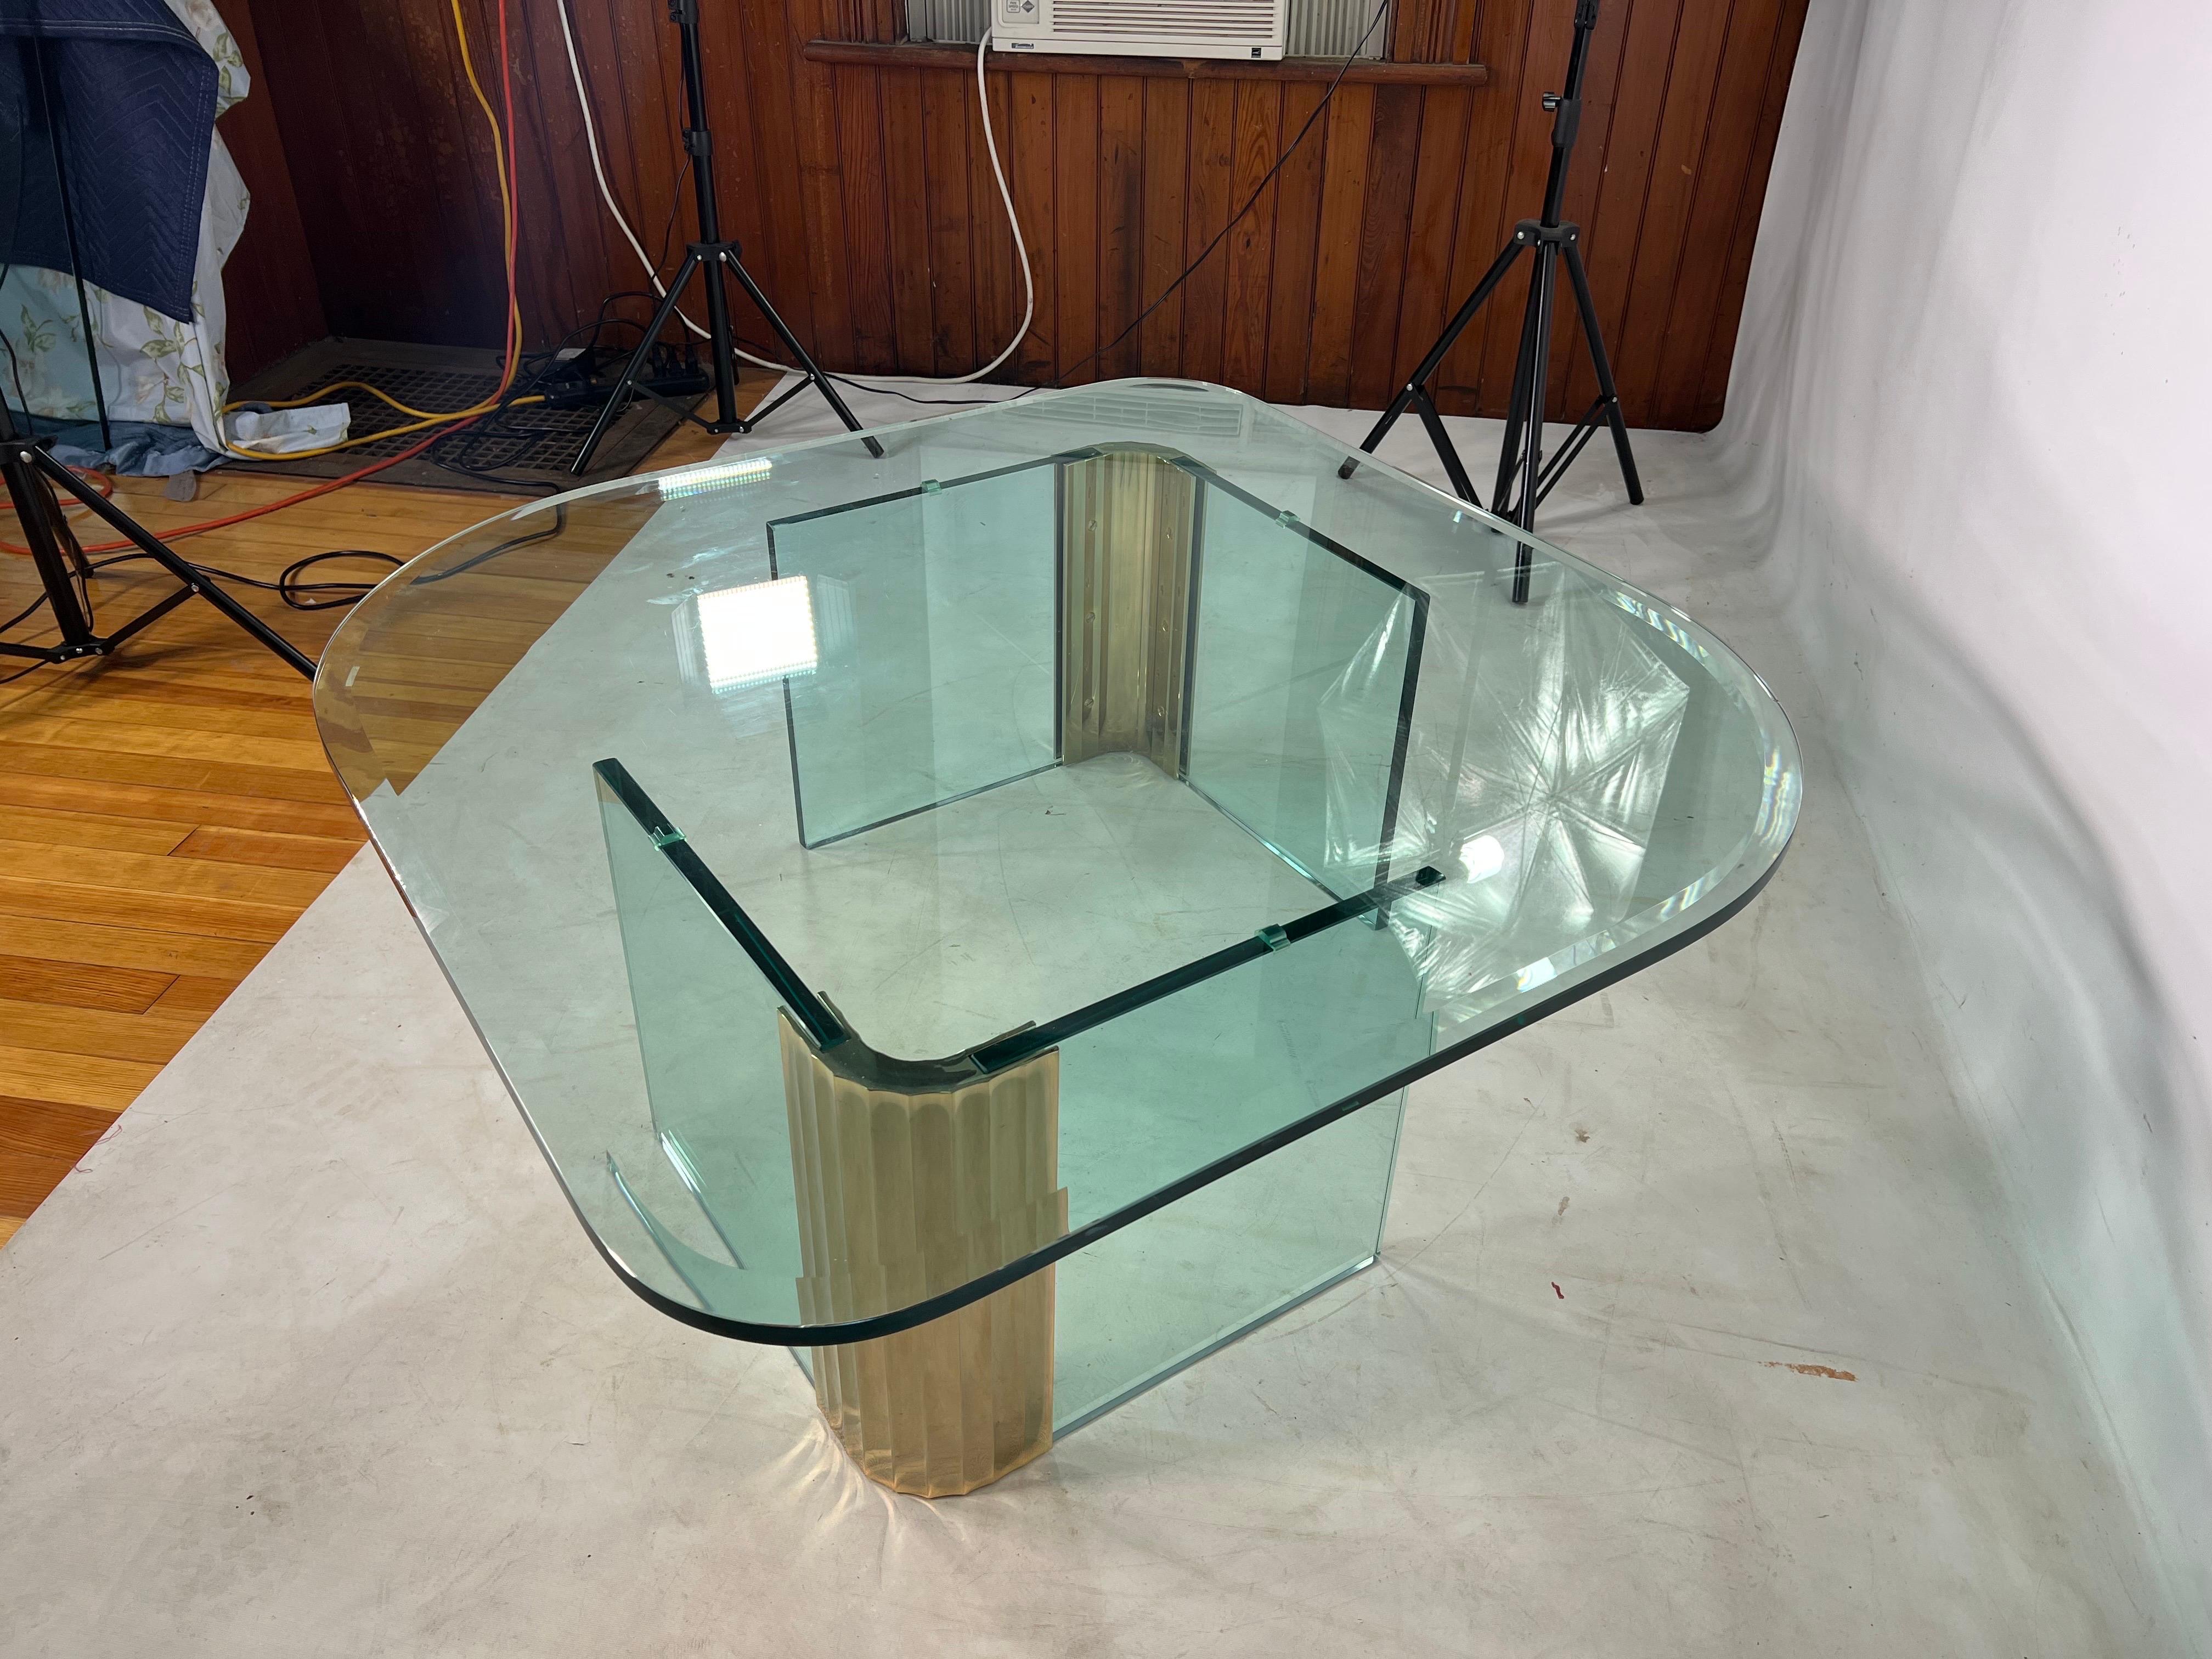 Vintage Pace Collection waterfall scalloped brass and glass coffee table by Leon Rosen. This is a gorgeous coffee table that is in very good shape.